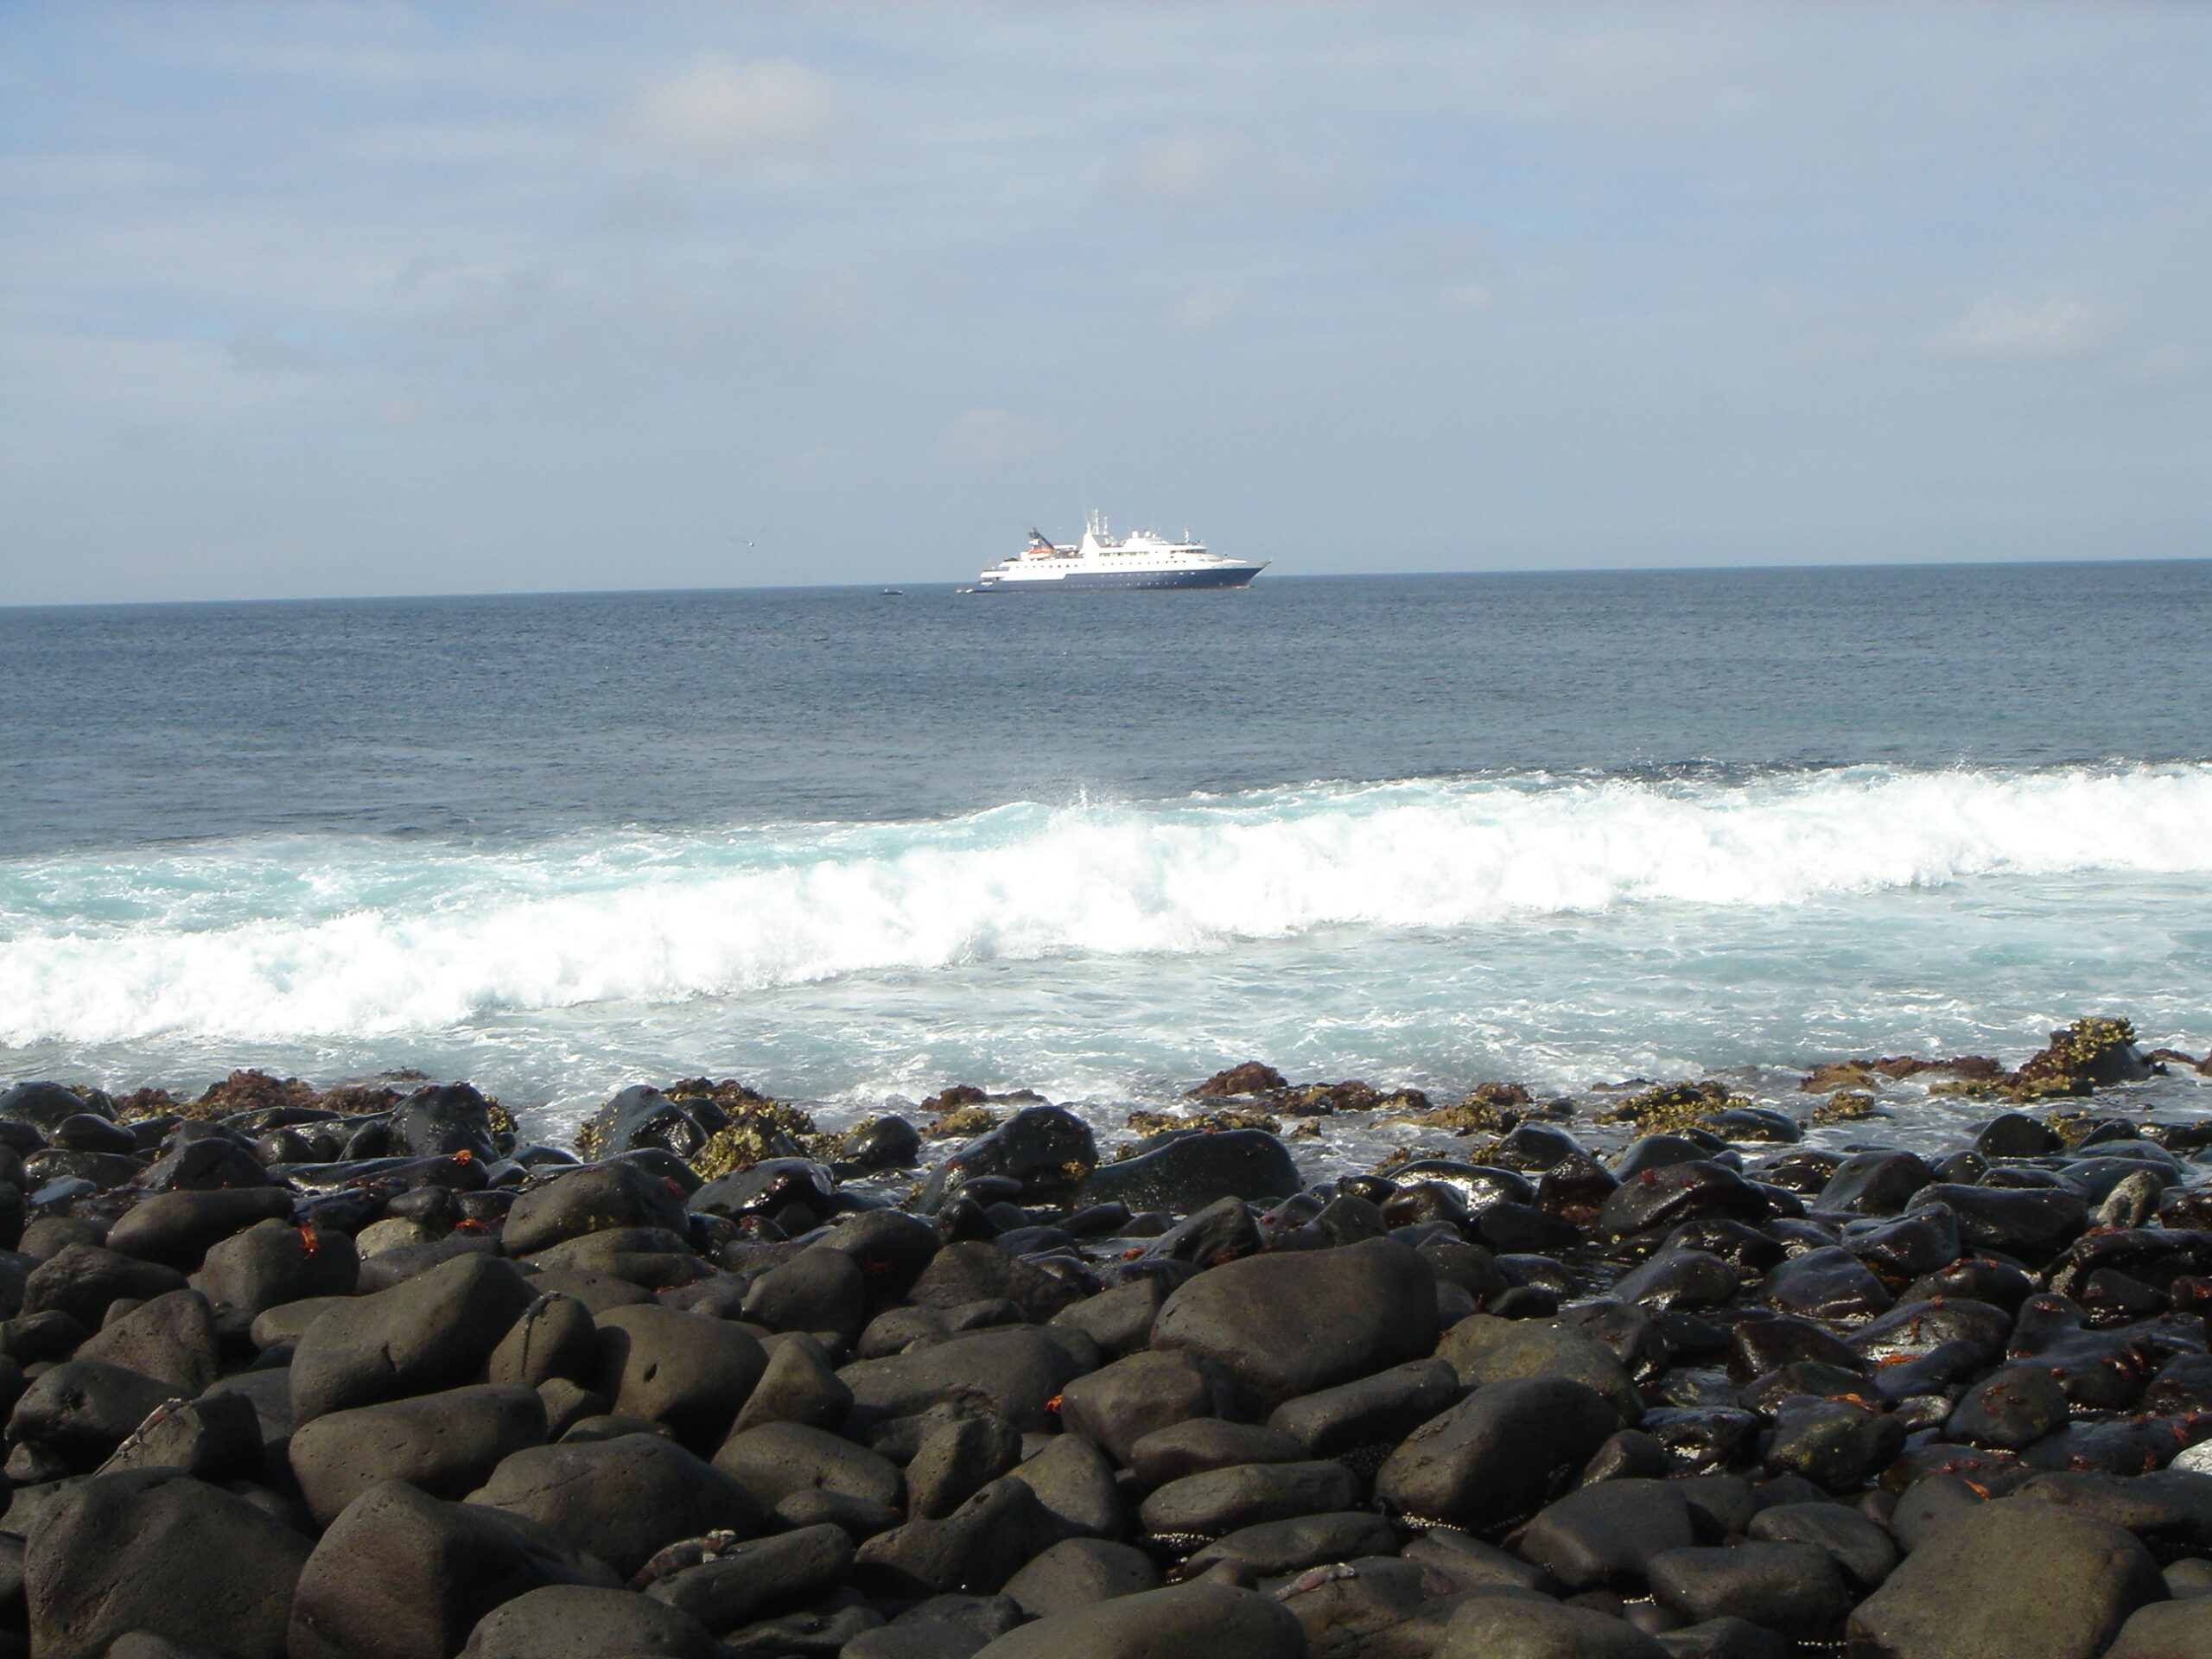 View of ship from Espanola Island b